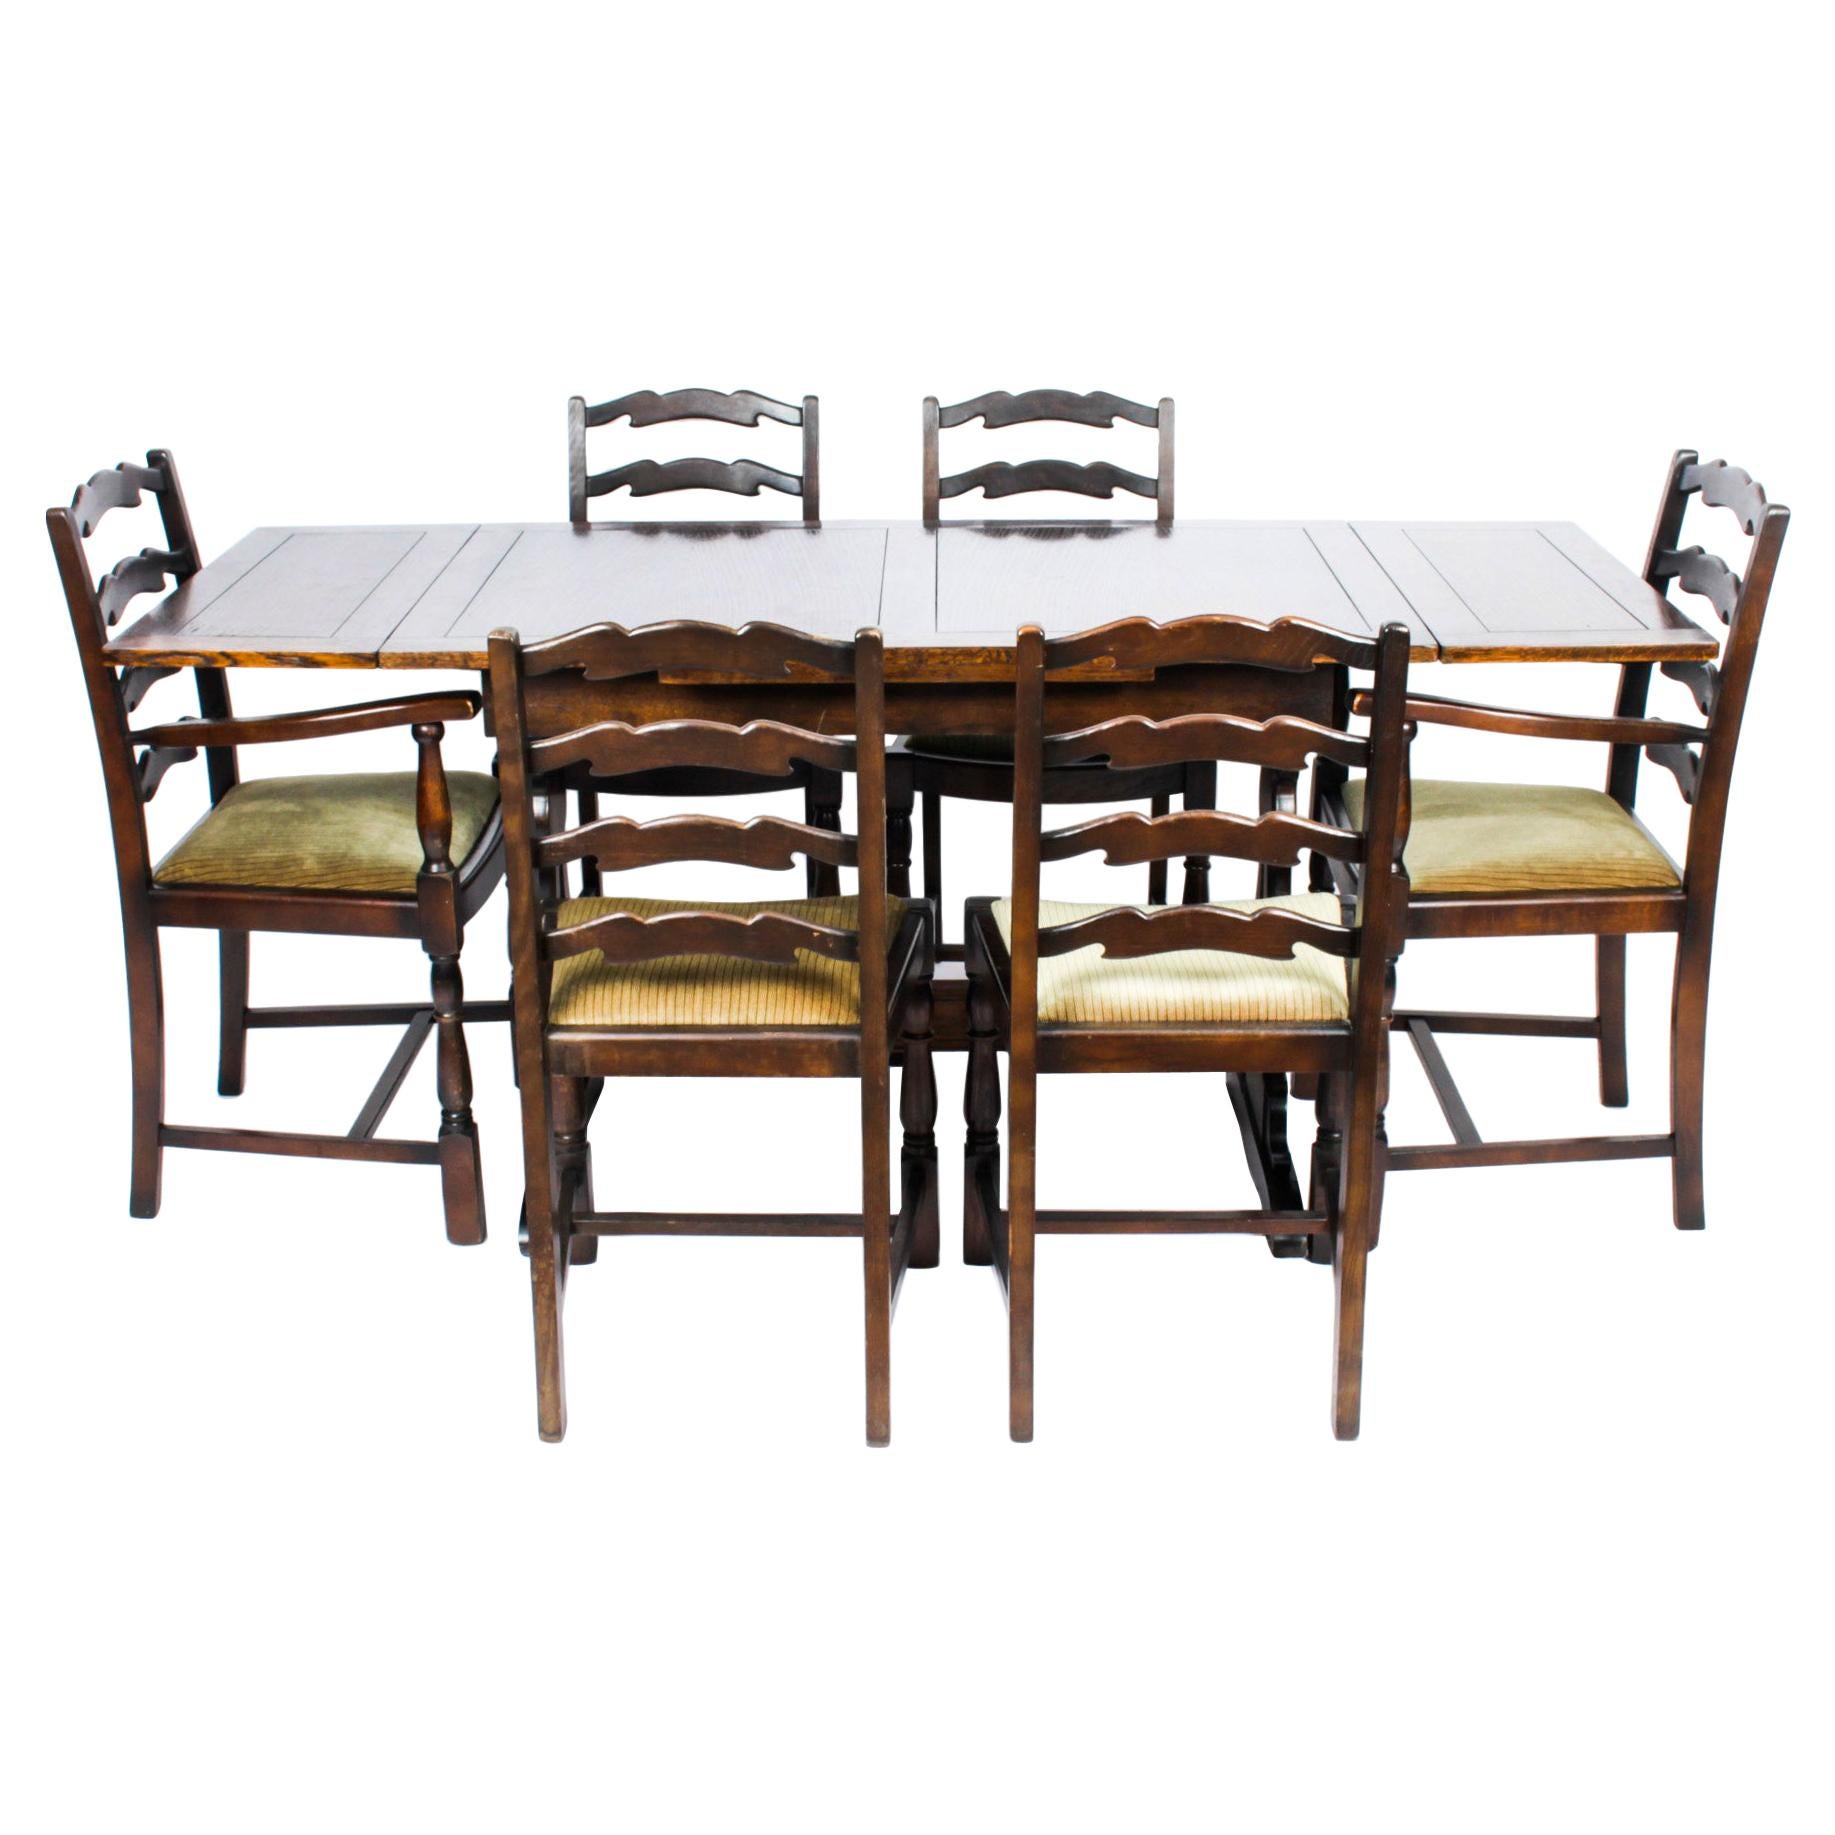 Vintage Oak Draw Leaf Refectory Dining Table & 6 Chairs Mid 20th C